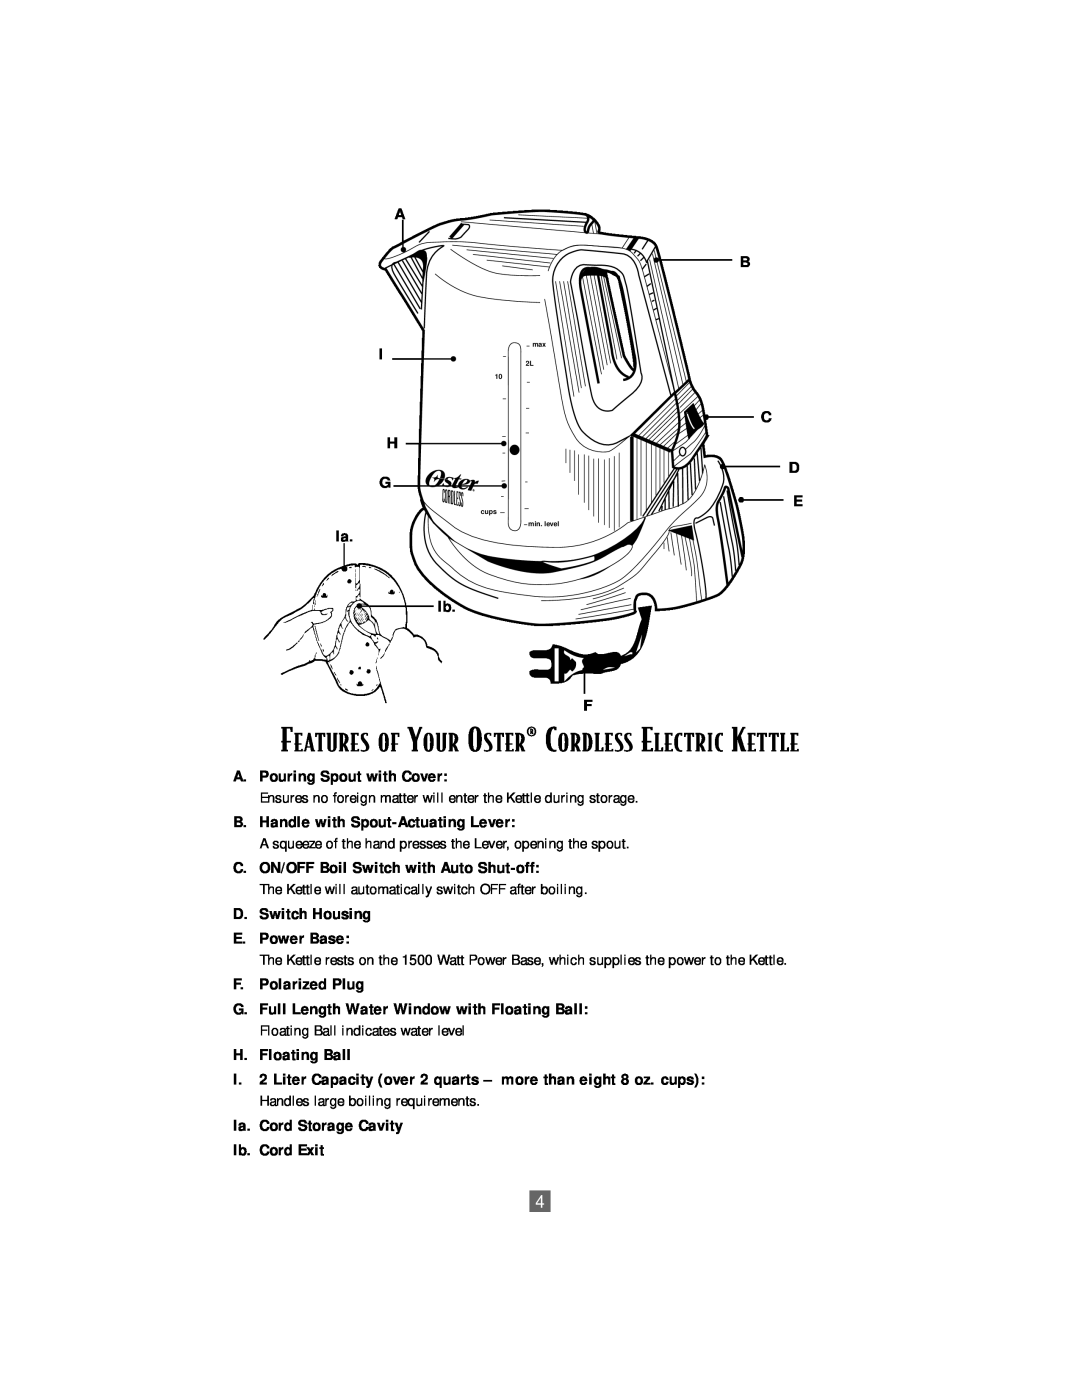 Sunbeam 3206 instruction manual Features Of Your Oster¨ Cordless Electric Kettle 